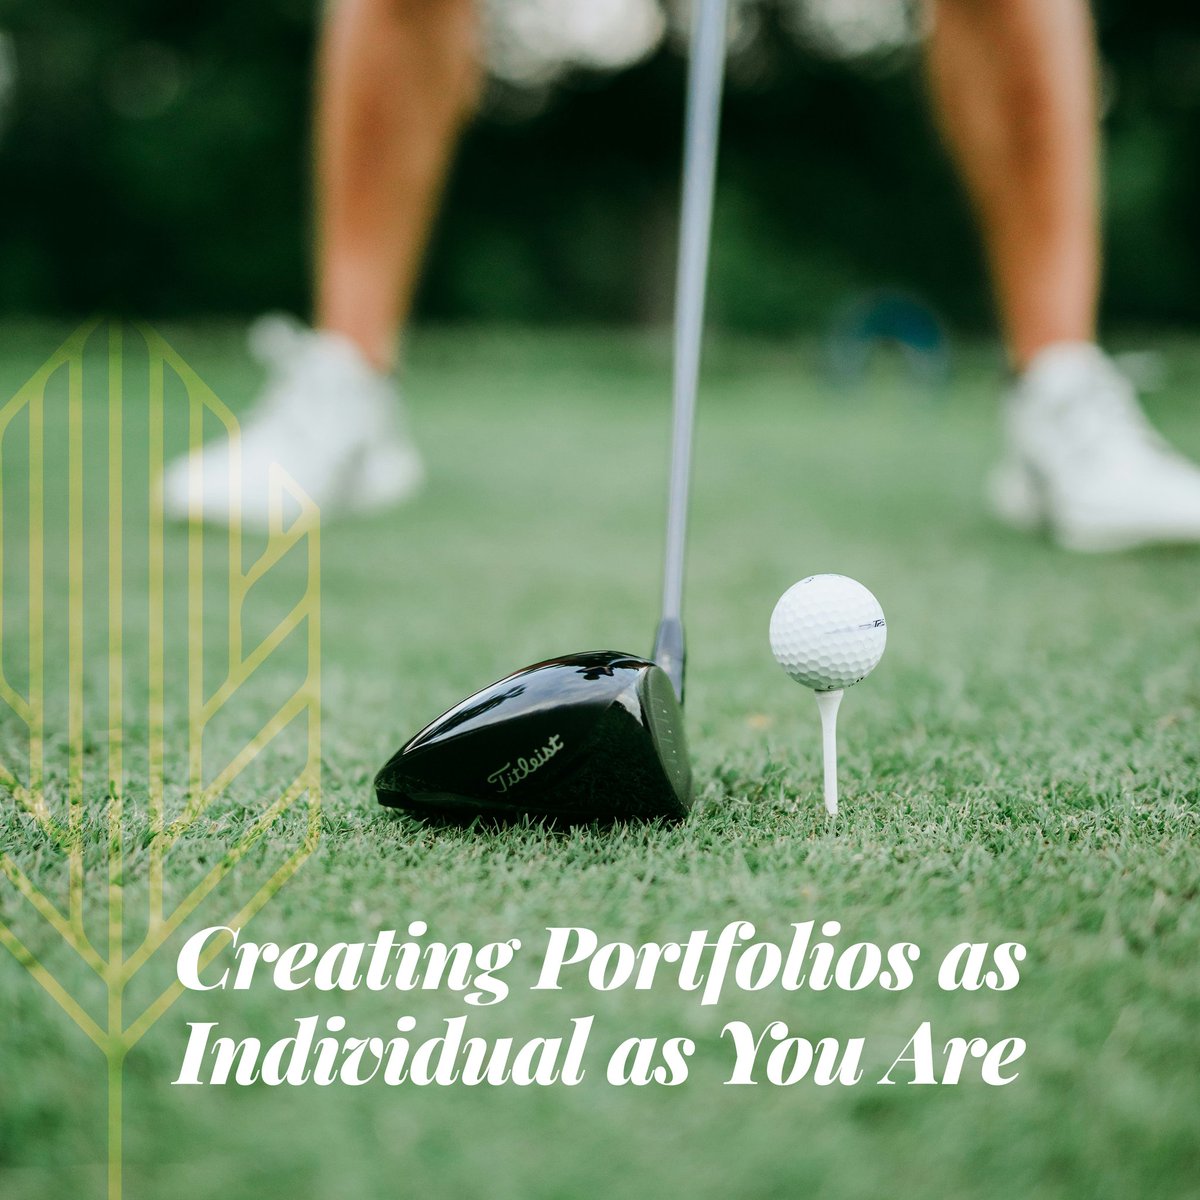 At Brentwood Financial Advisors, we design portfolios that reflect your individuality. Arrange a private consultation: bit.ly/3vf8eN7 #BrentwoodFinancial #FinancialAdvisors #WealthAdvice #FinancialServices